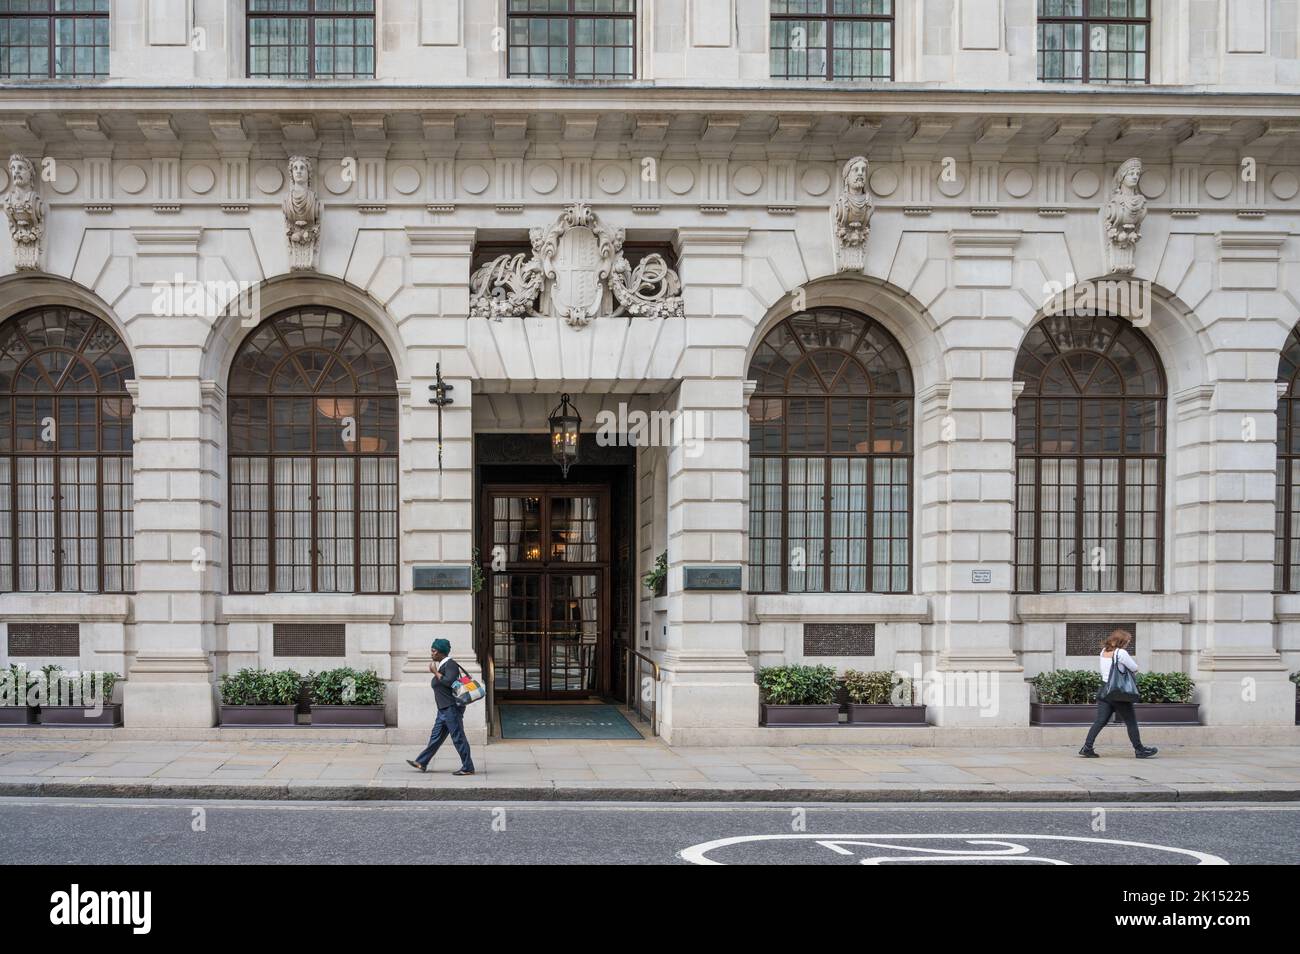 Exterior facade of The Ned, 5 star hotel with a Members Club and Spa on Poultry, City of London, England, UK Stock Photo